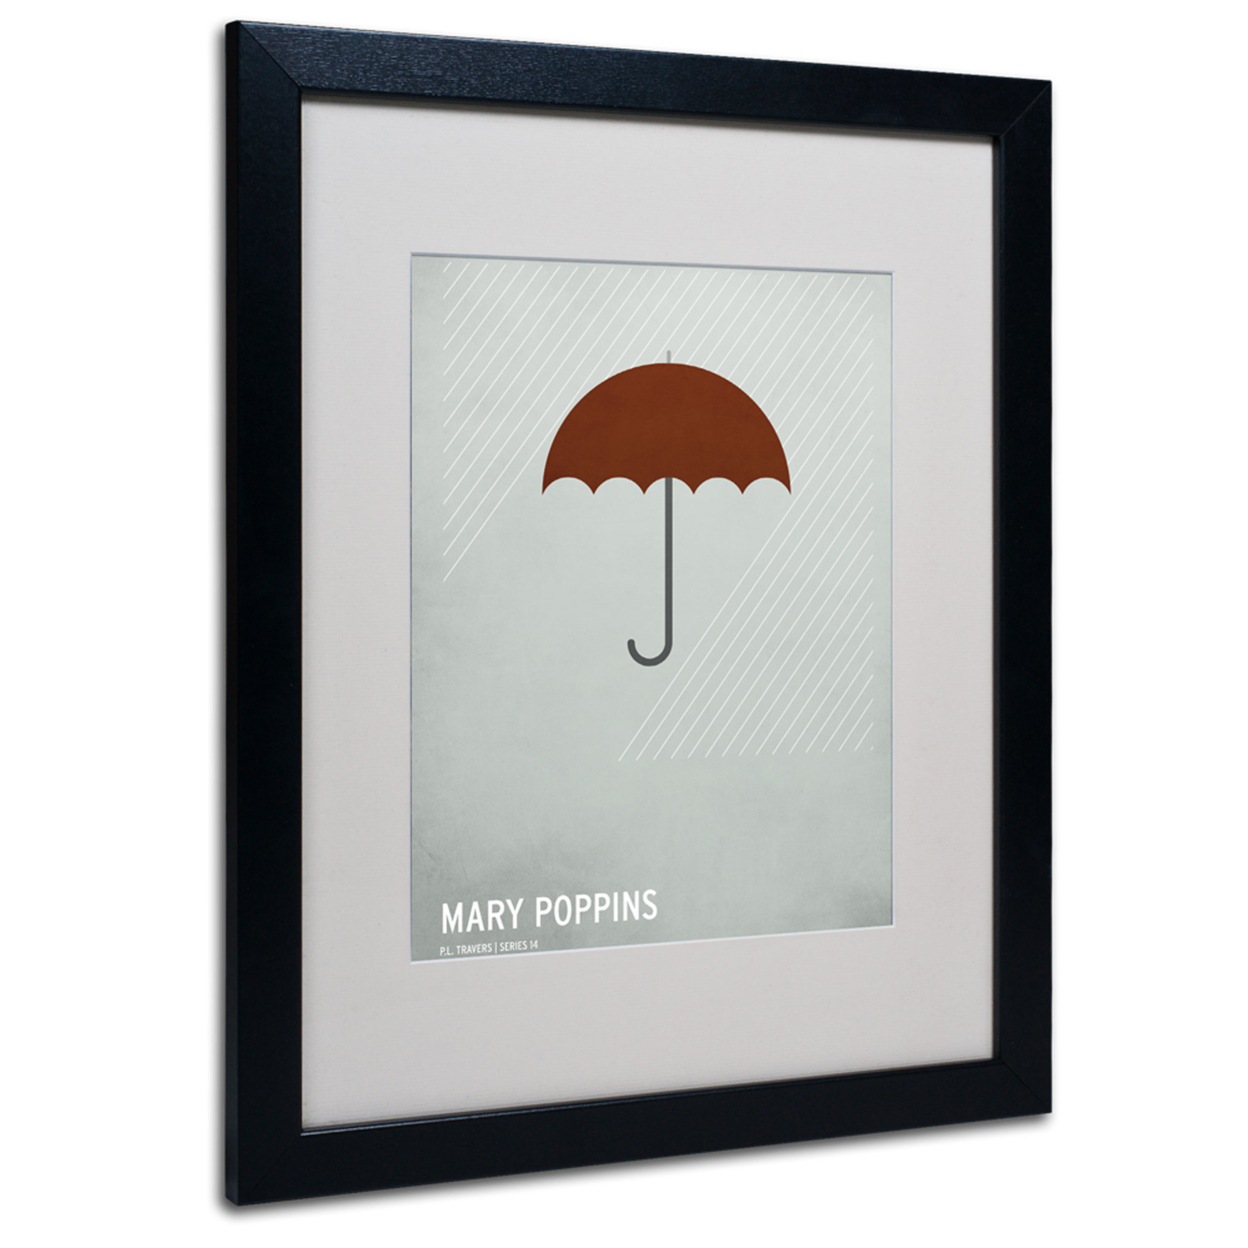 Christian Jackson 'Mary Poppins' Black Wooden Framed Art 18 X 22 Inches